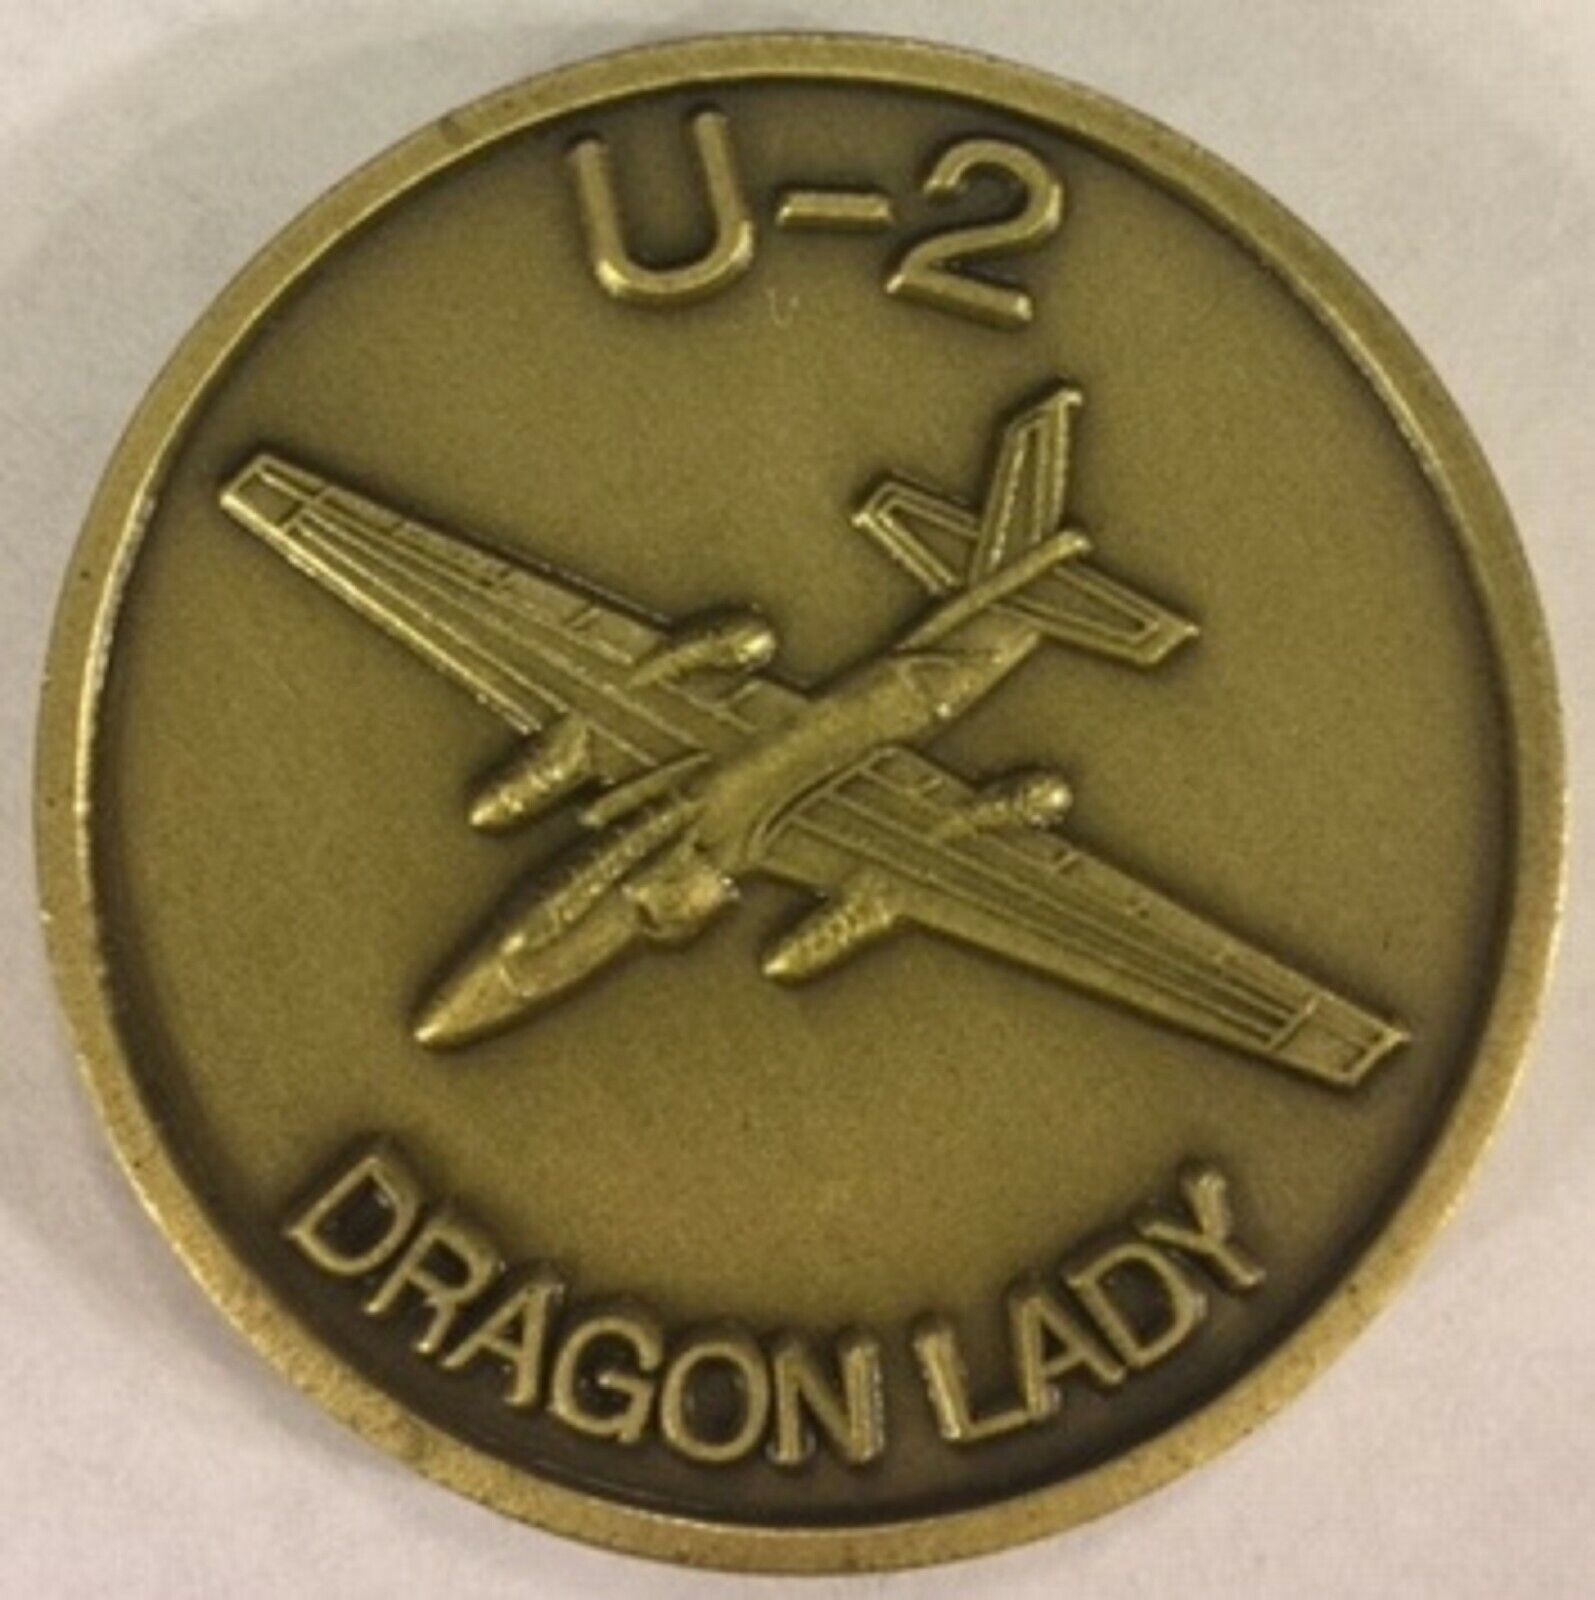 U-2 DRAGON LADY TOWARD THE UNKNOWN CHALLENGE COIN